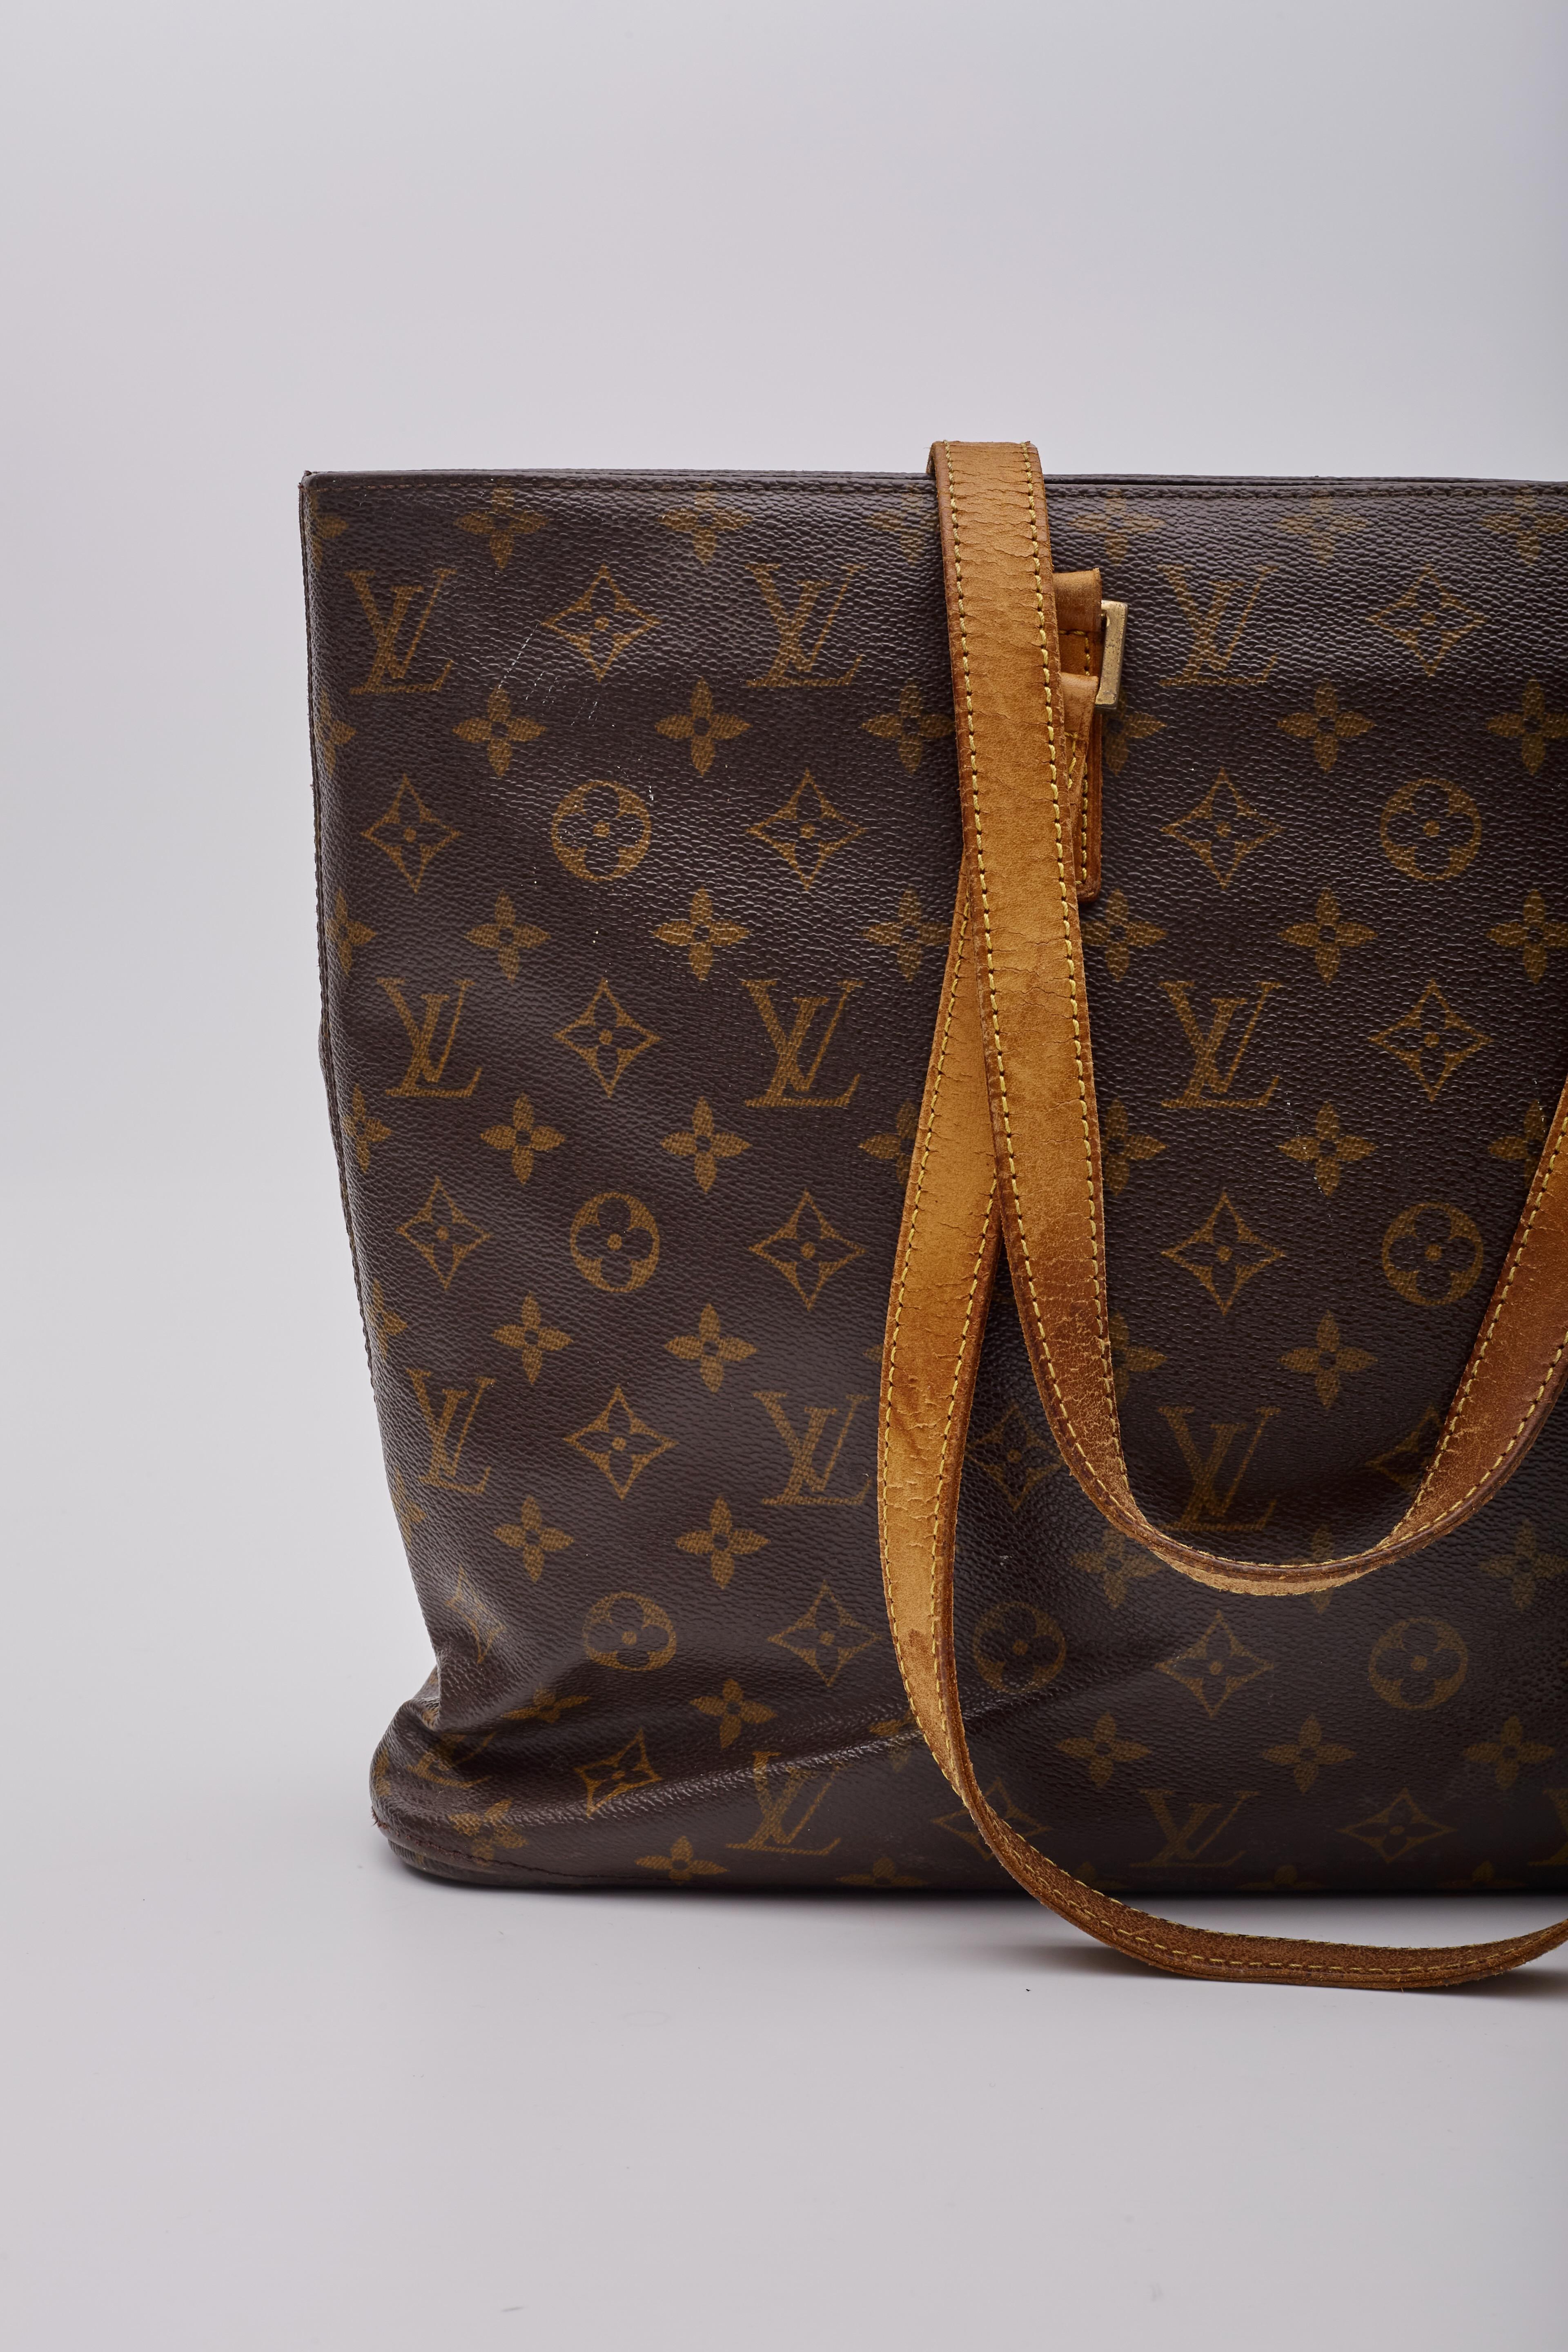 Louis Vuitton Monogram Canvas Luco Tote Bag Gm In Good Condition For Sale In Montreal, Quebec